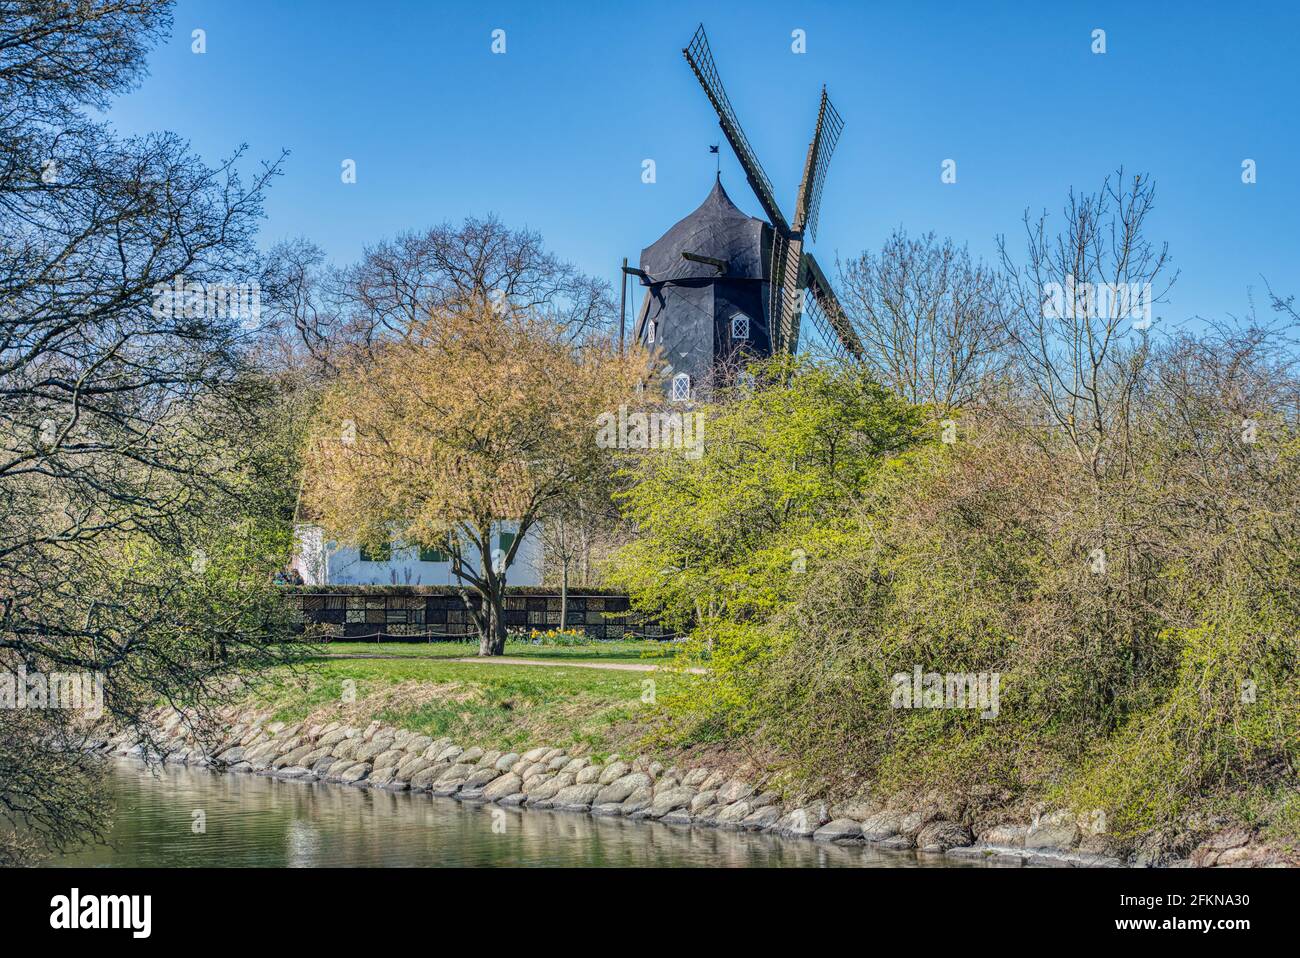 Slottsmollan (Castel wind mill) in the popular Malmo Kungsparken among blooming trees as the park 's canal flows underneath the wooden windmill Stock Photo